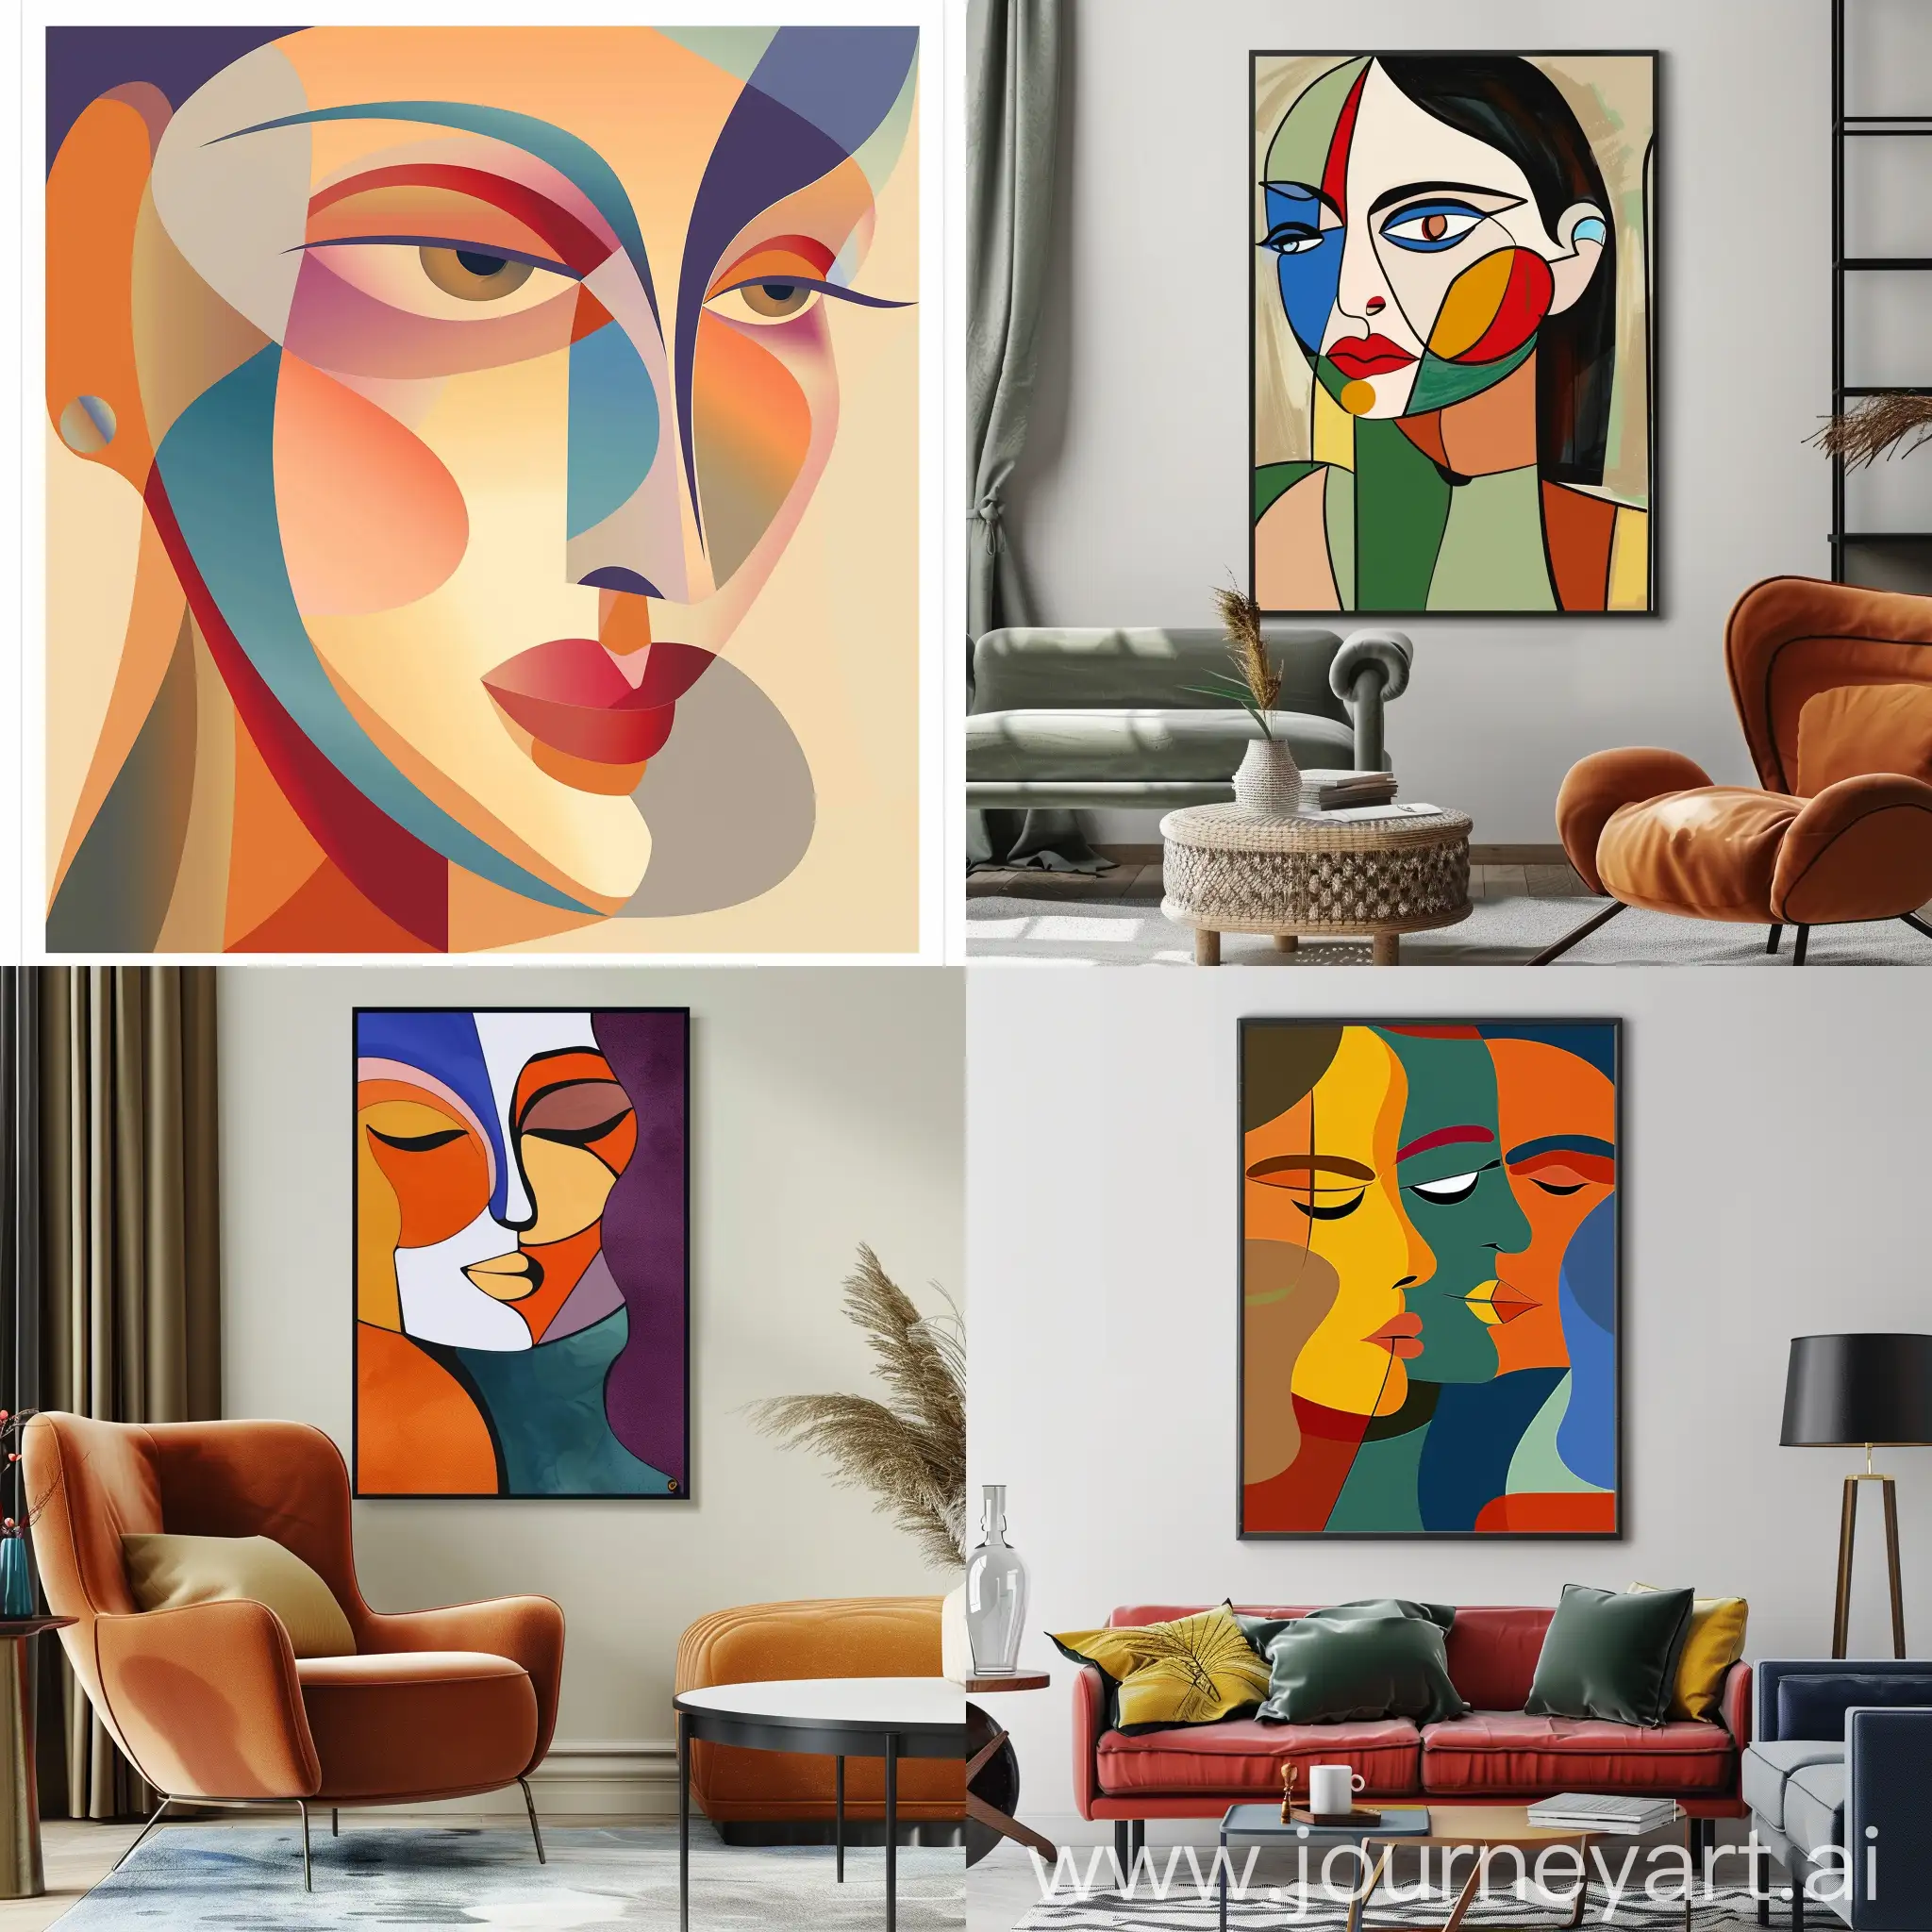 Abstract cartoon Female portrait poster on the wall by Alexander Archipenko and Keith Negley.